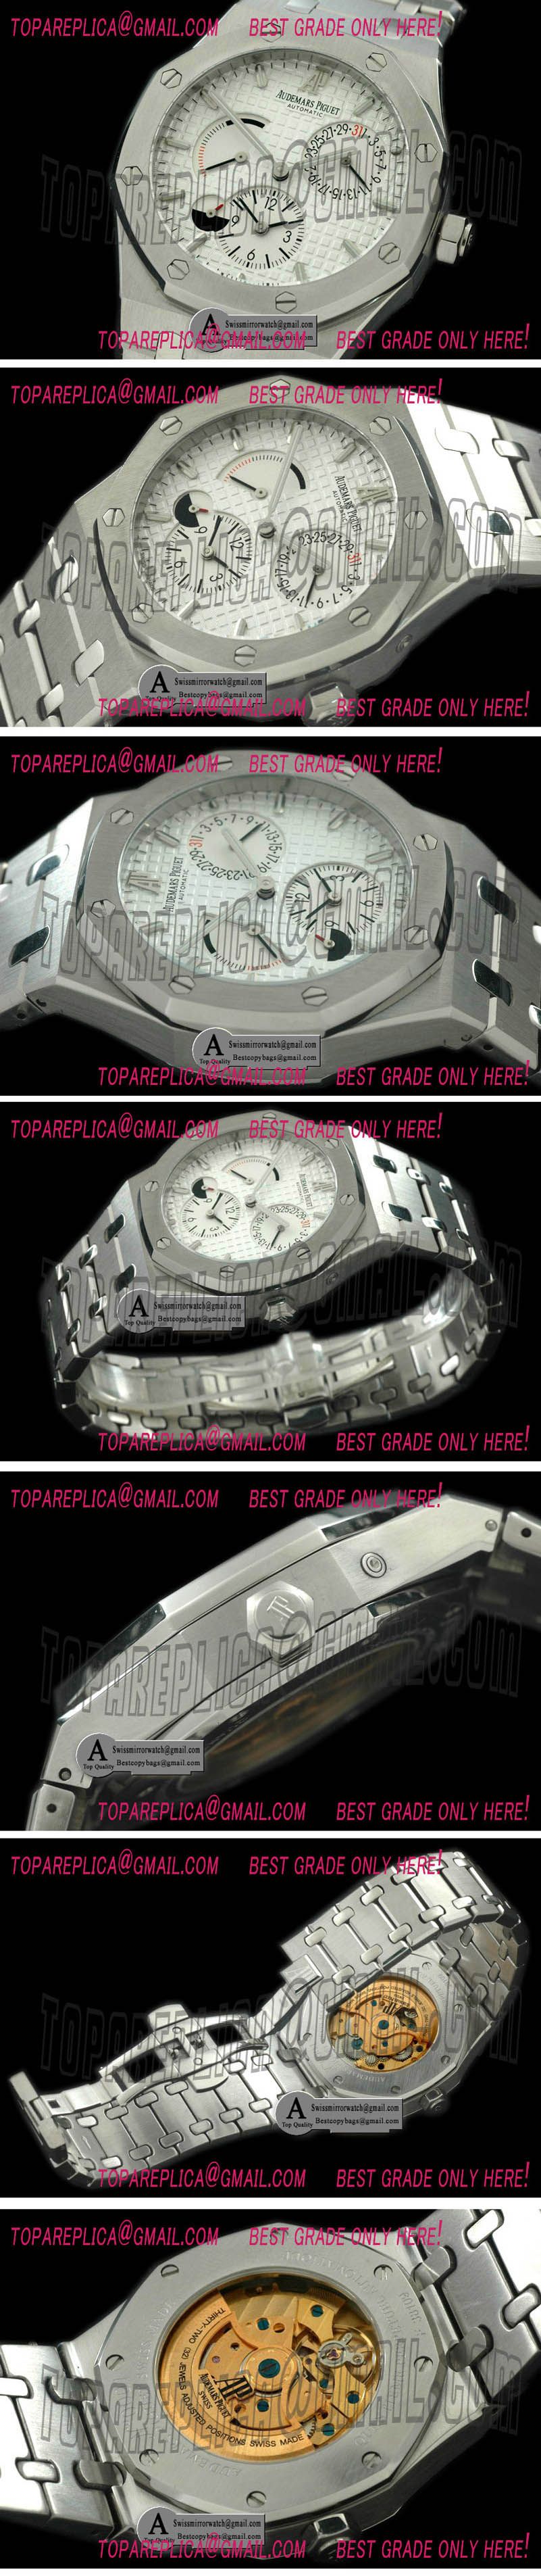 Audemars Piguet Royal Oak Reserve/Duo 26120ST.OO.1220ST.01 Time SS/SS White Asian 23 Automatic Replica Watches